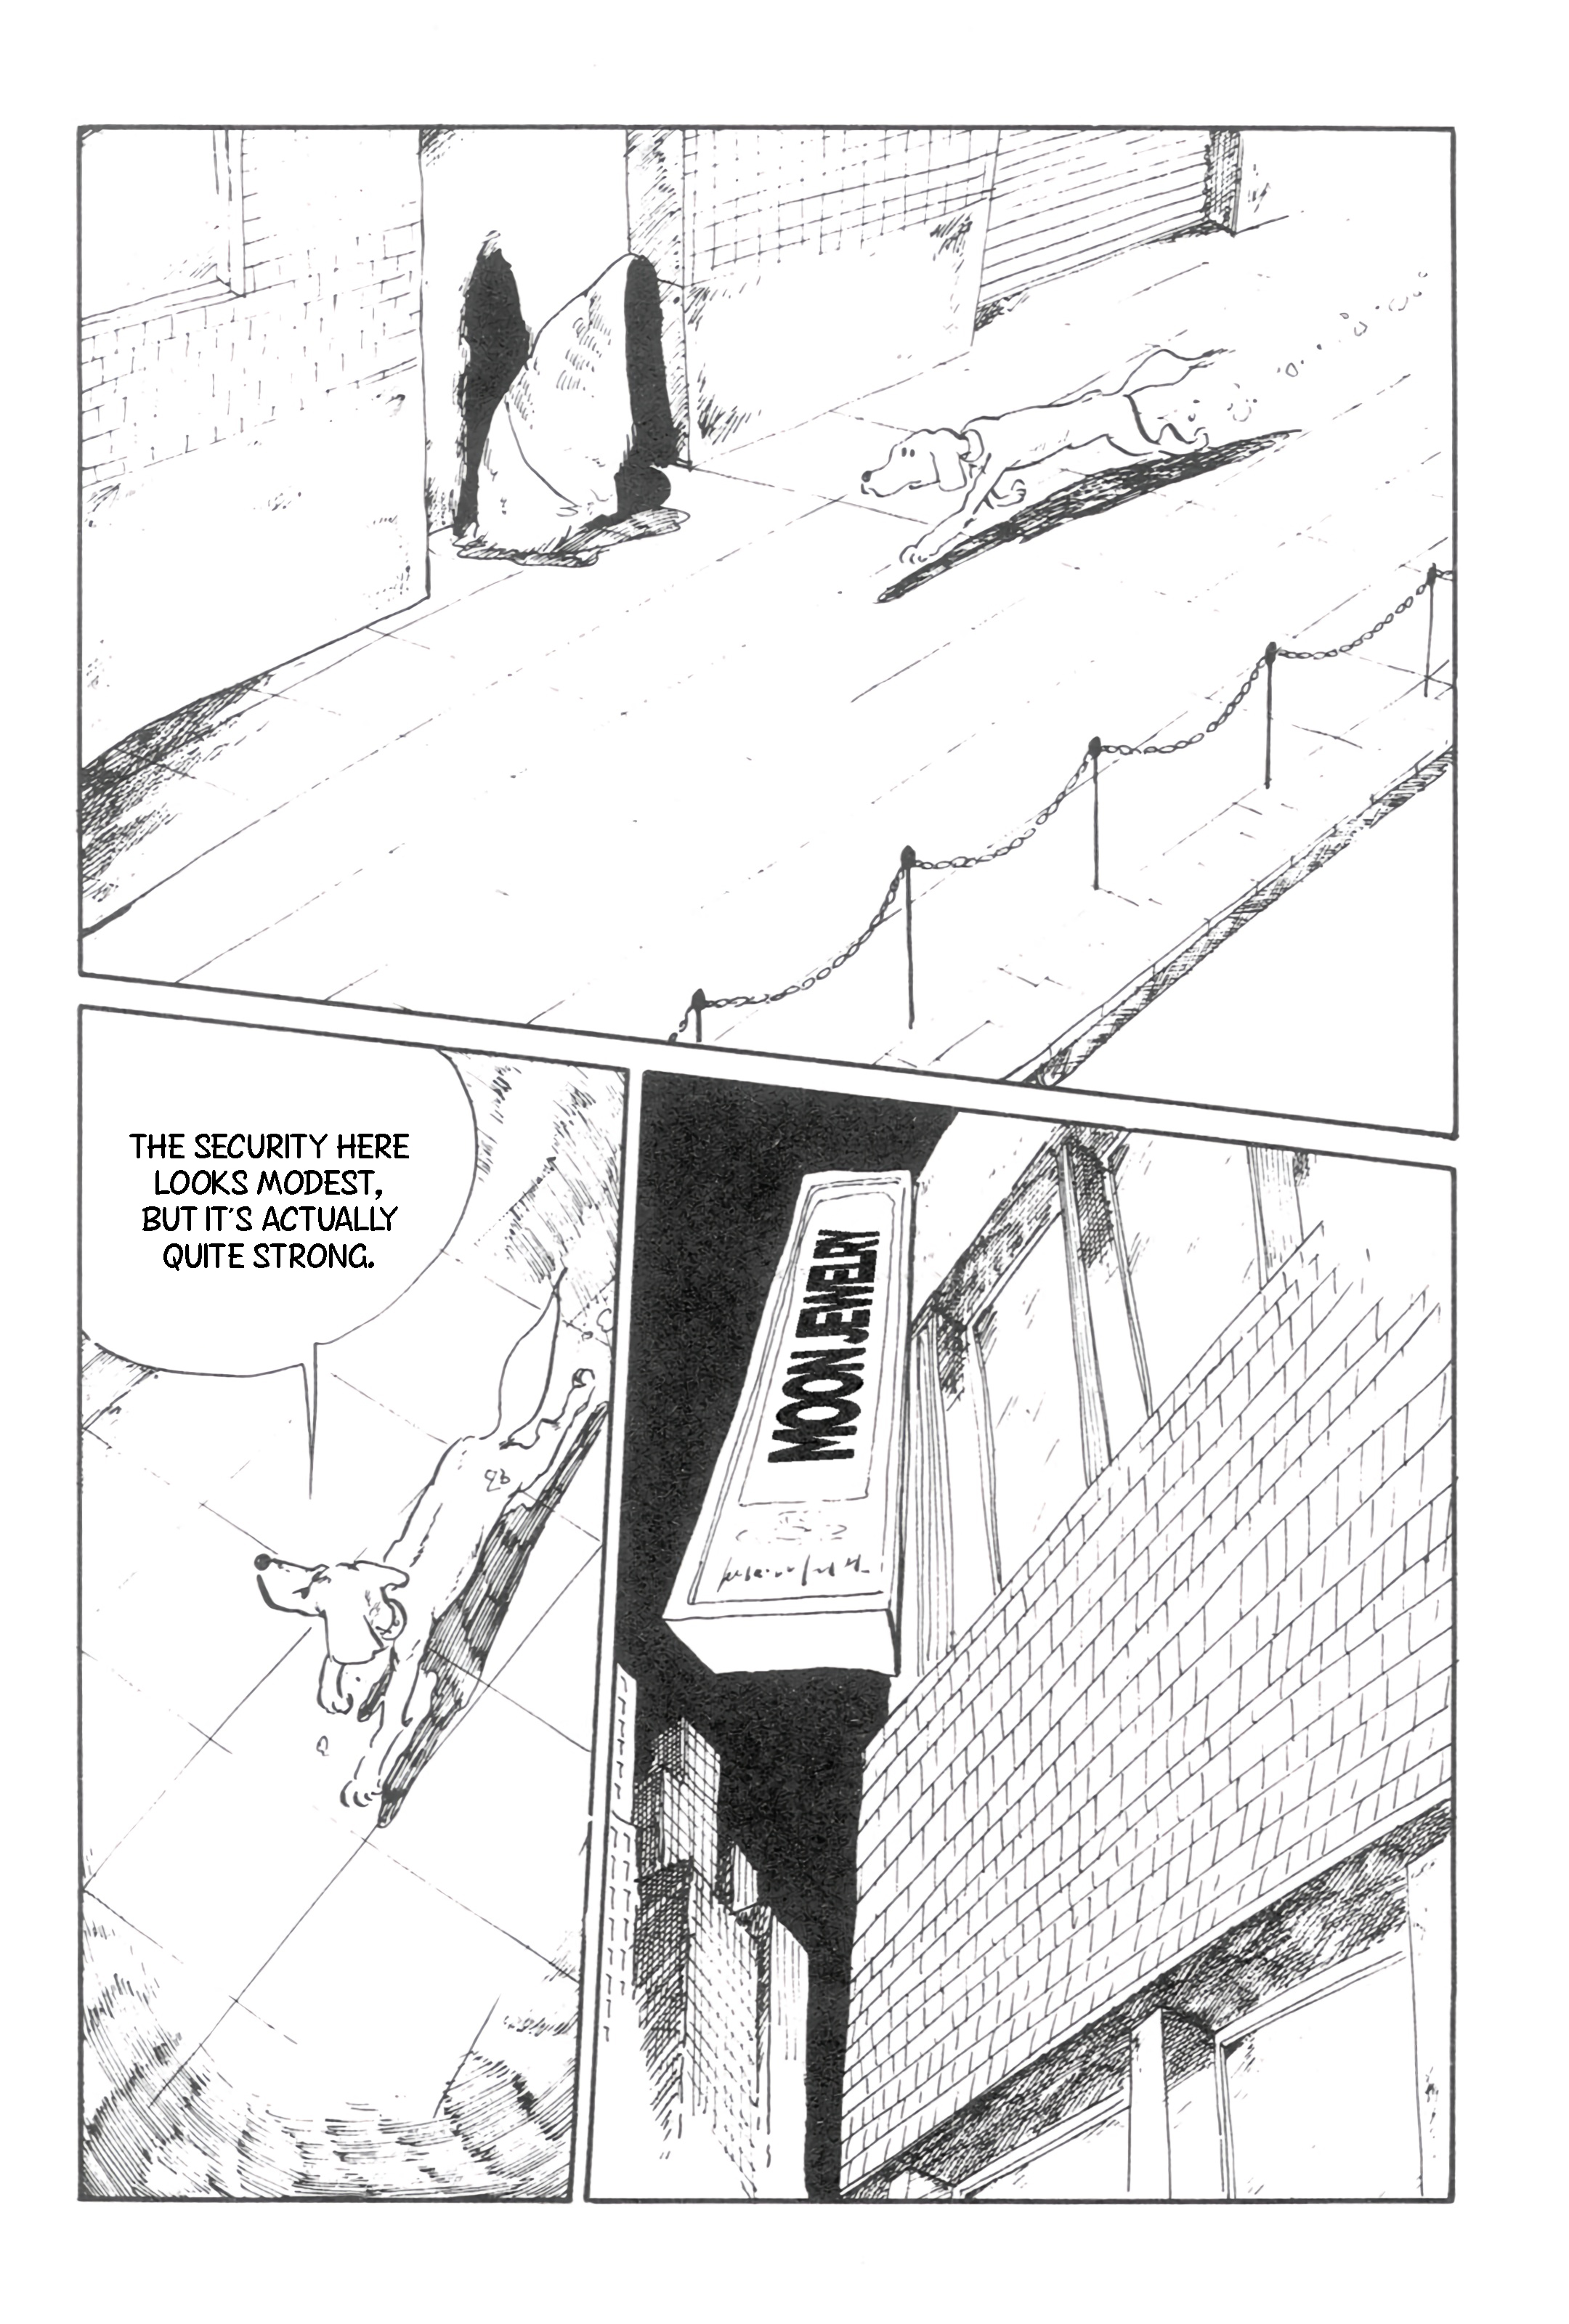 Lupin Iii: World’S Most Wanted Vol.12 Chapter 135: Jerk-In-The-Box - Picture 2